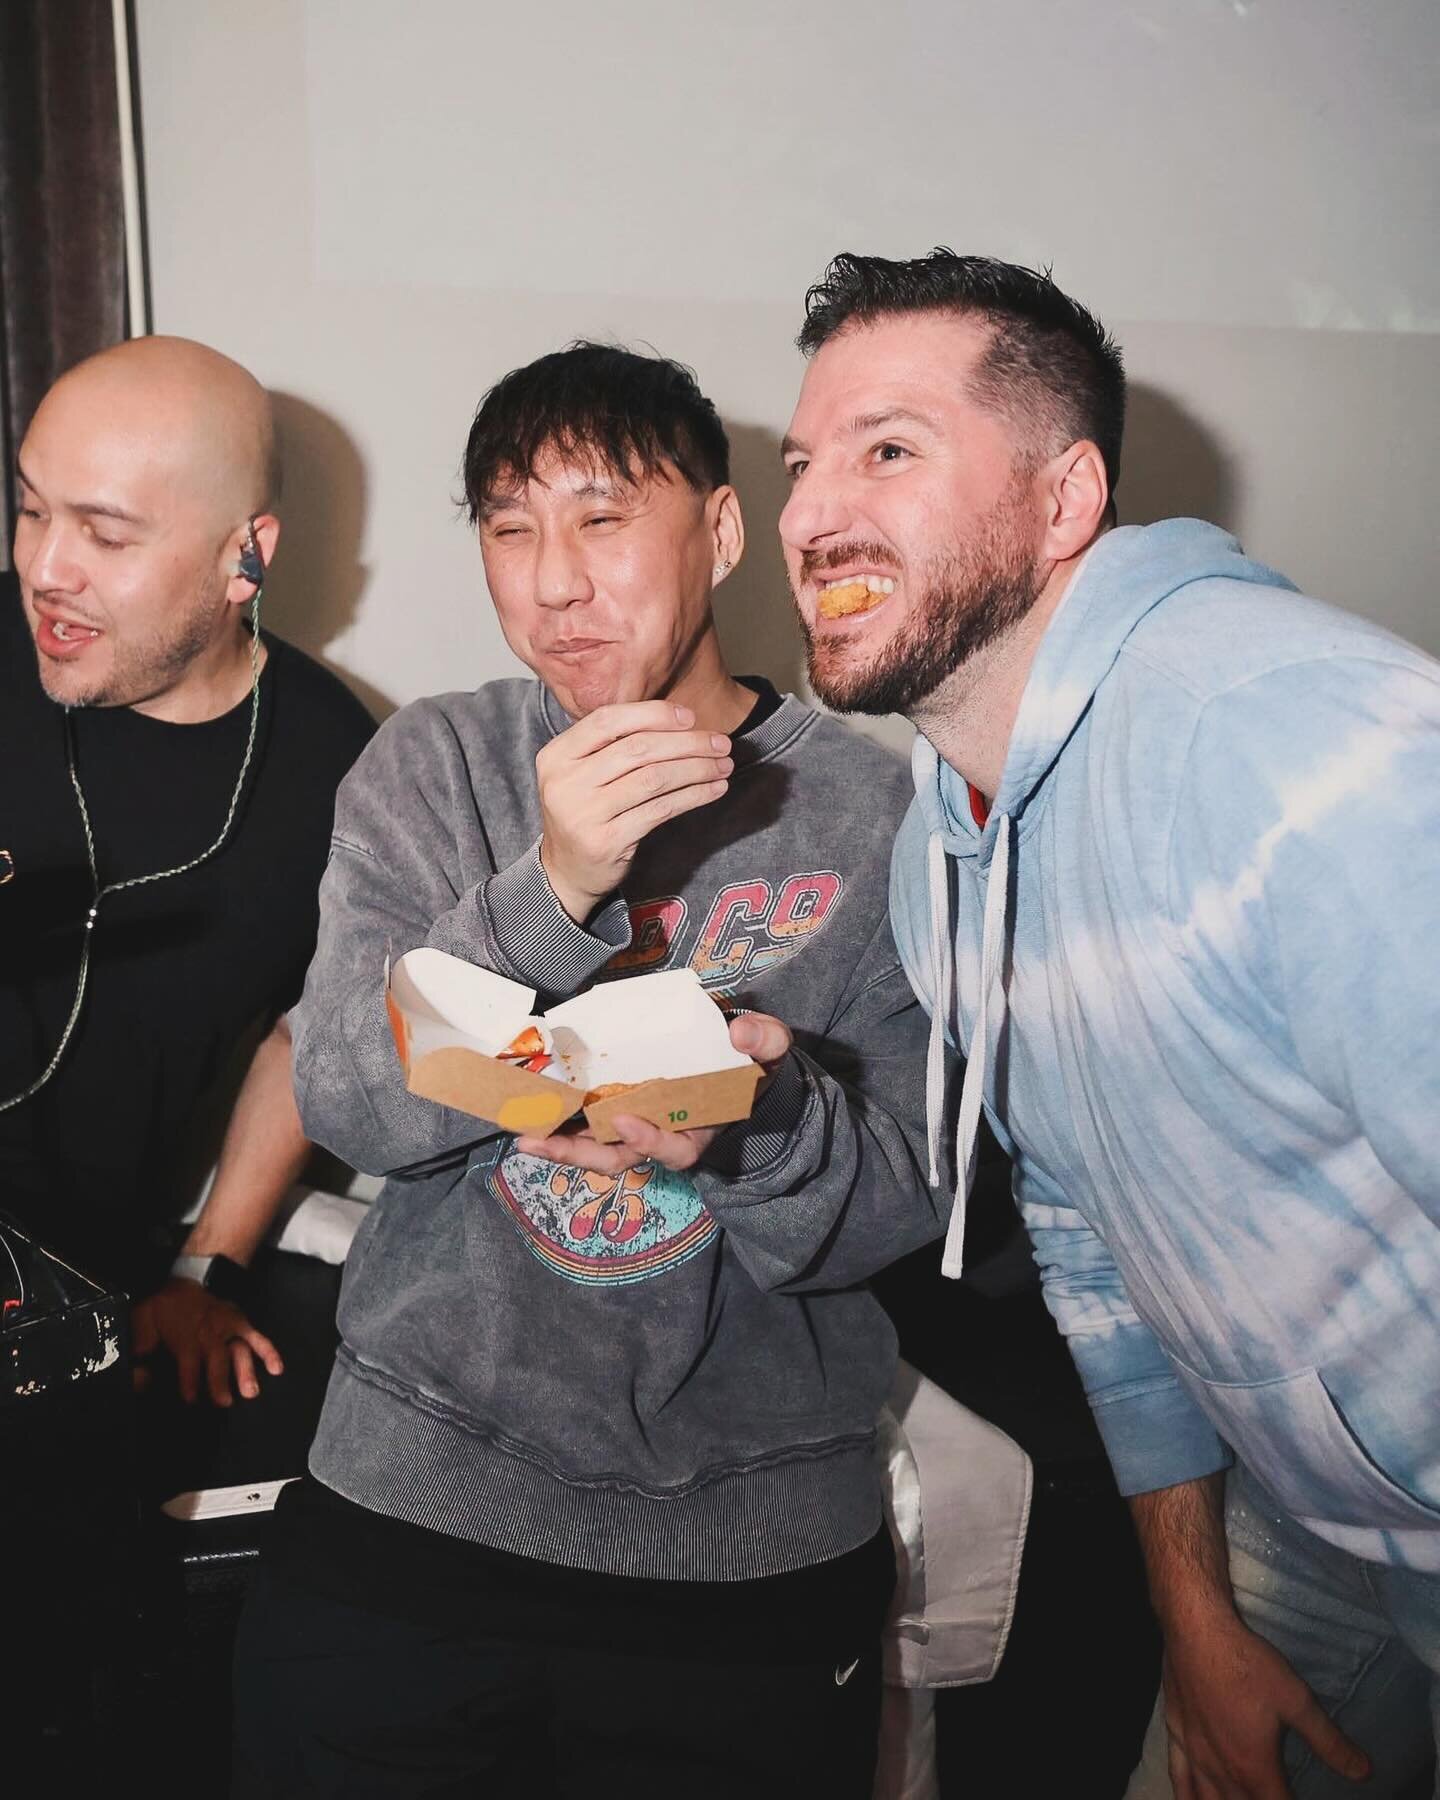 &hellip;a candid picture of the three of us showing our best angles ever for Trevor&rsquo;s secondary birthday celebration featuring top shelf McDonald&rsquo;s @mixdowntown🙌. This picture was taken mid conversation as we were talking about how we us